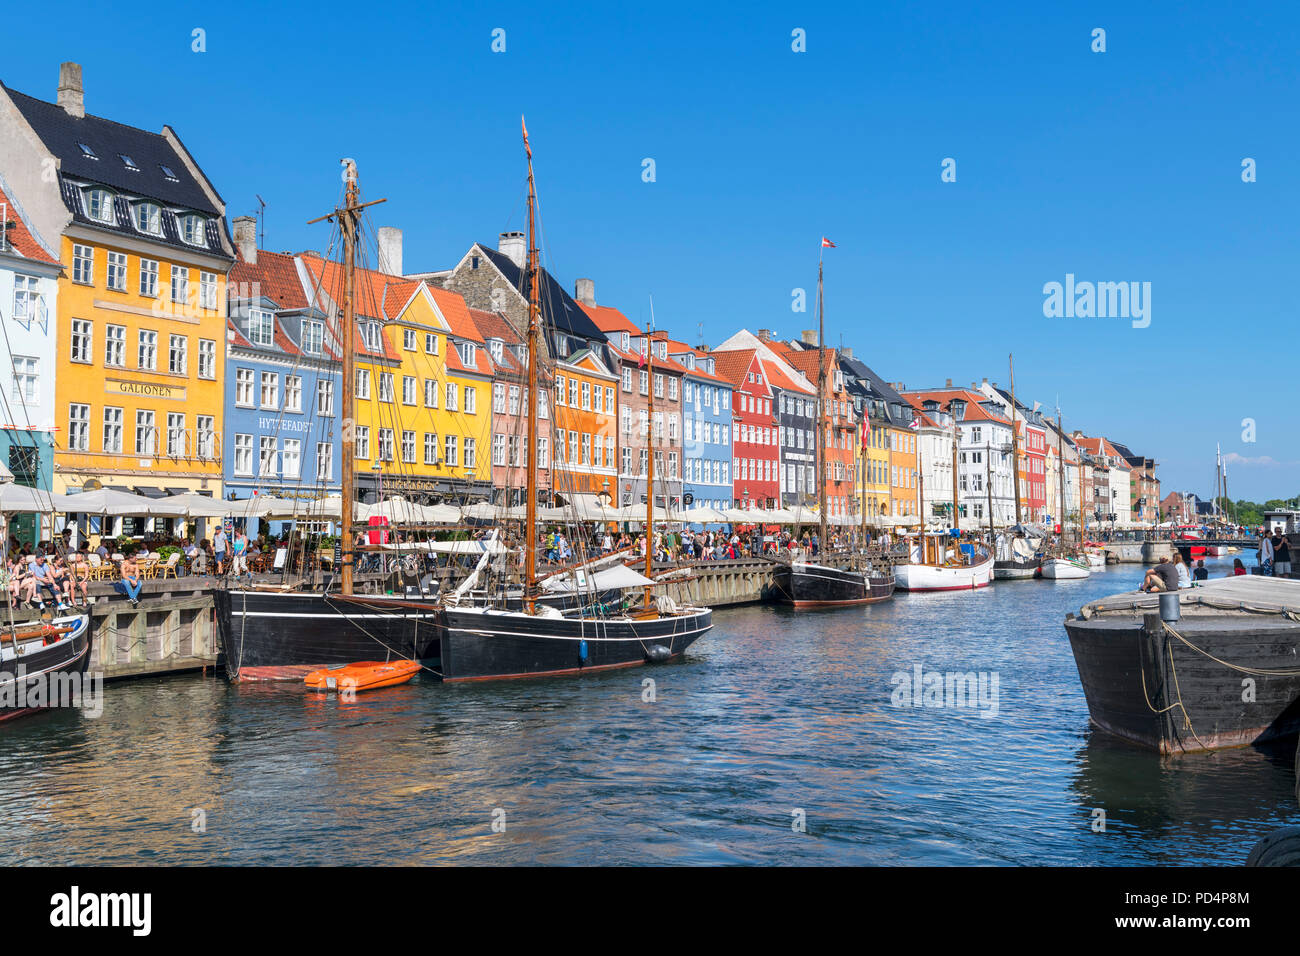 Historic 17th and 18th century buildings along the Nyhavn canal, Copenhagen, Denmark Stock Photo